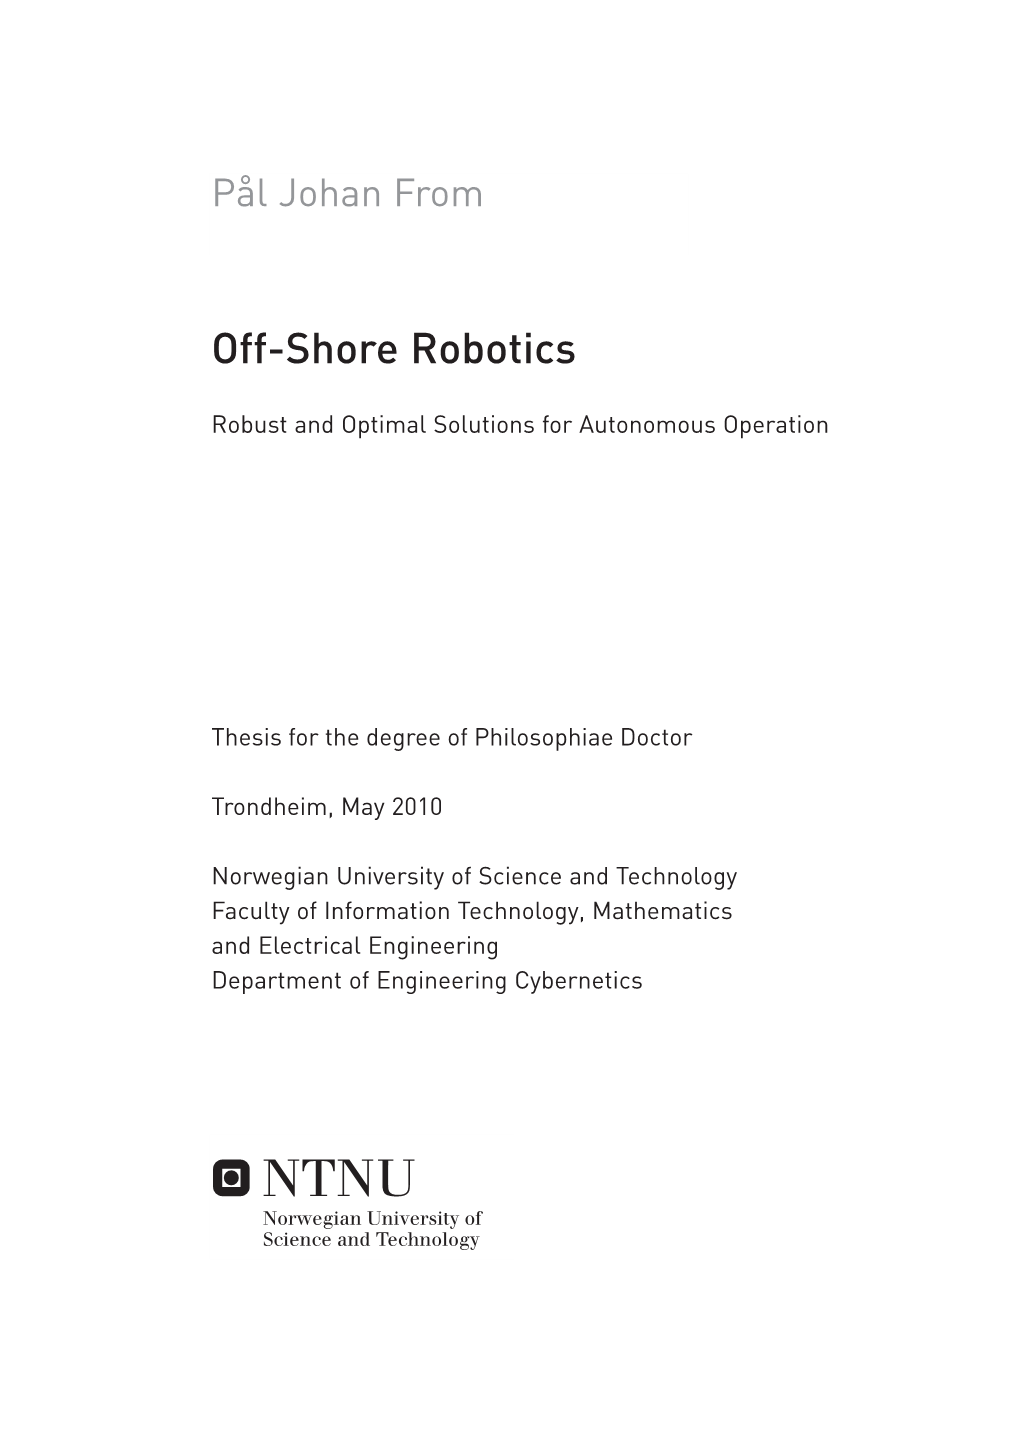 Off-Shore Robotics, but There Are Also Other Applications Where the Results Are Indeed Applicable